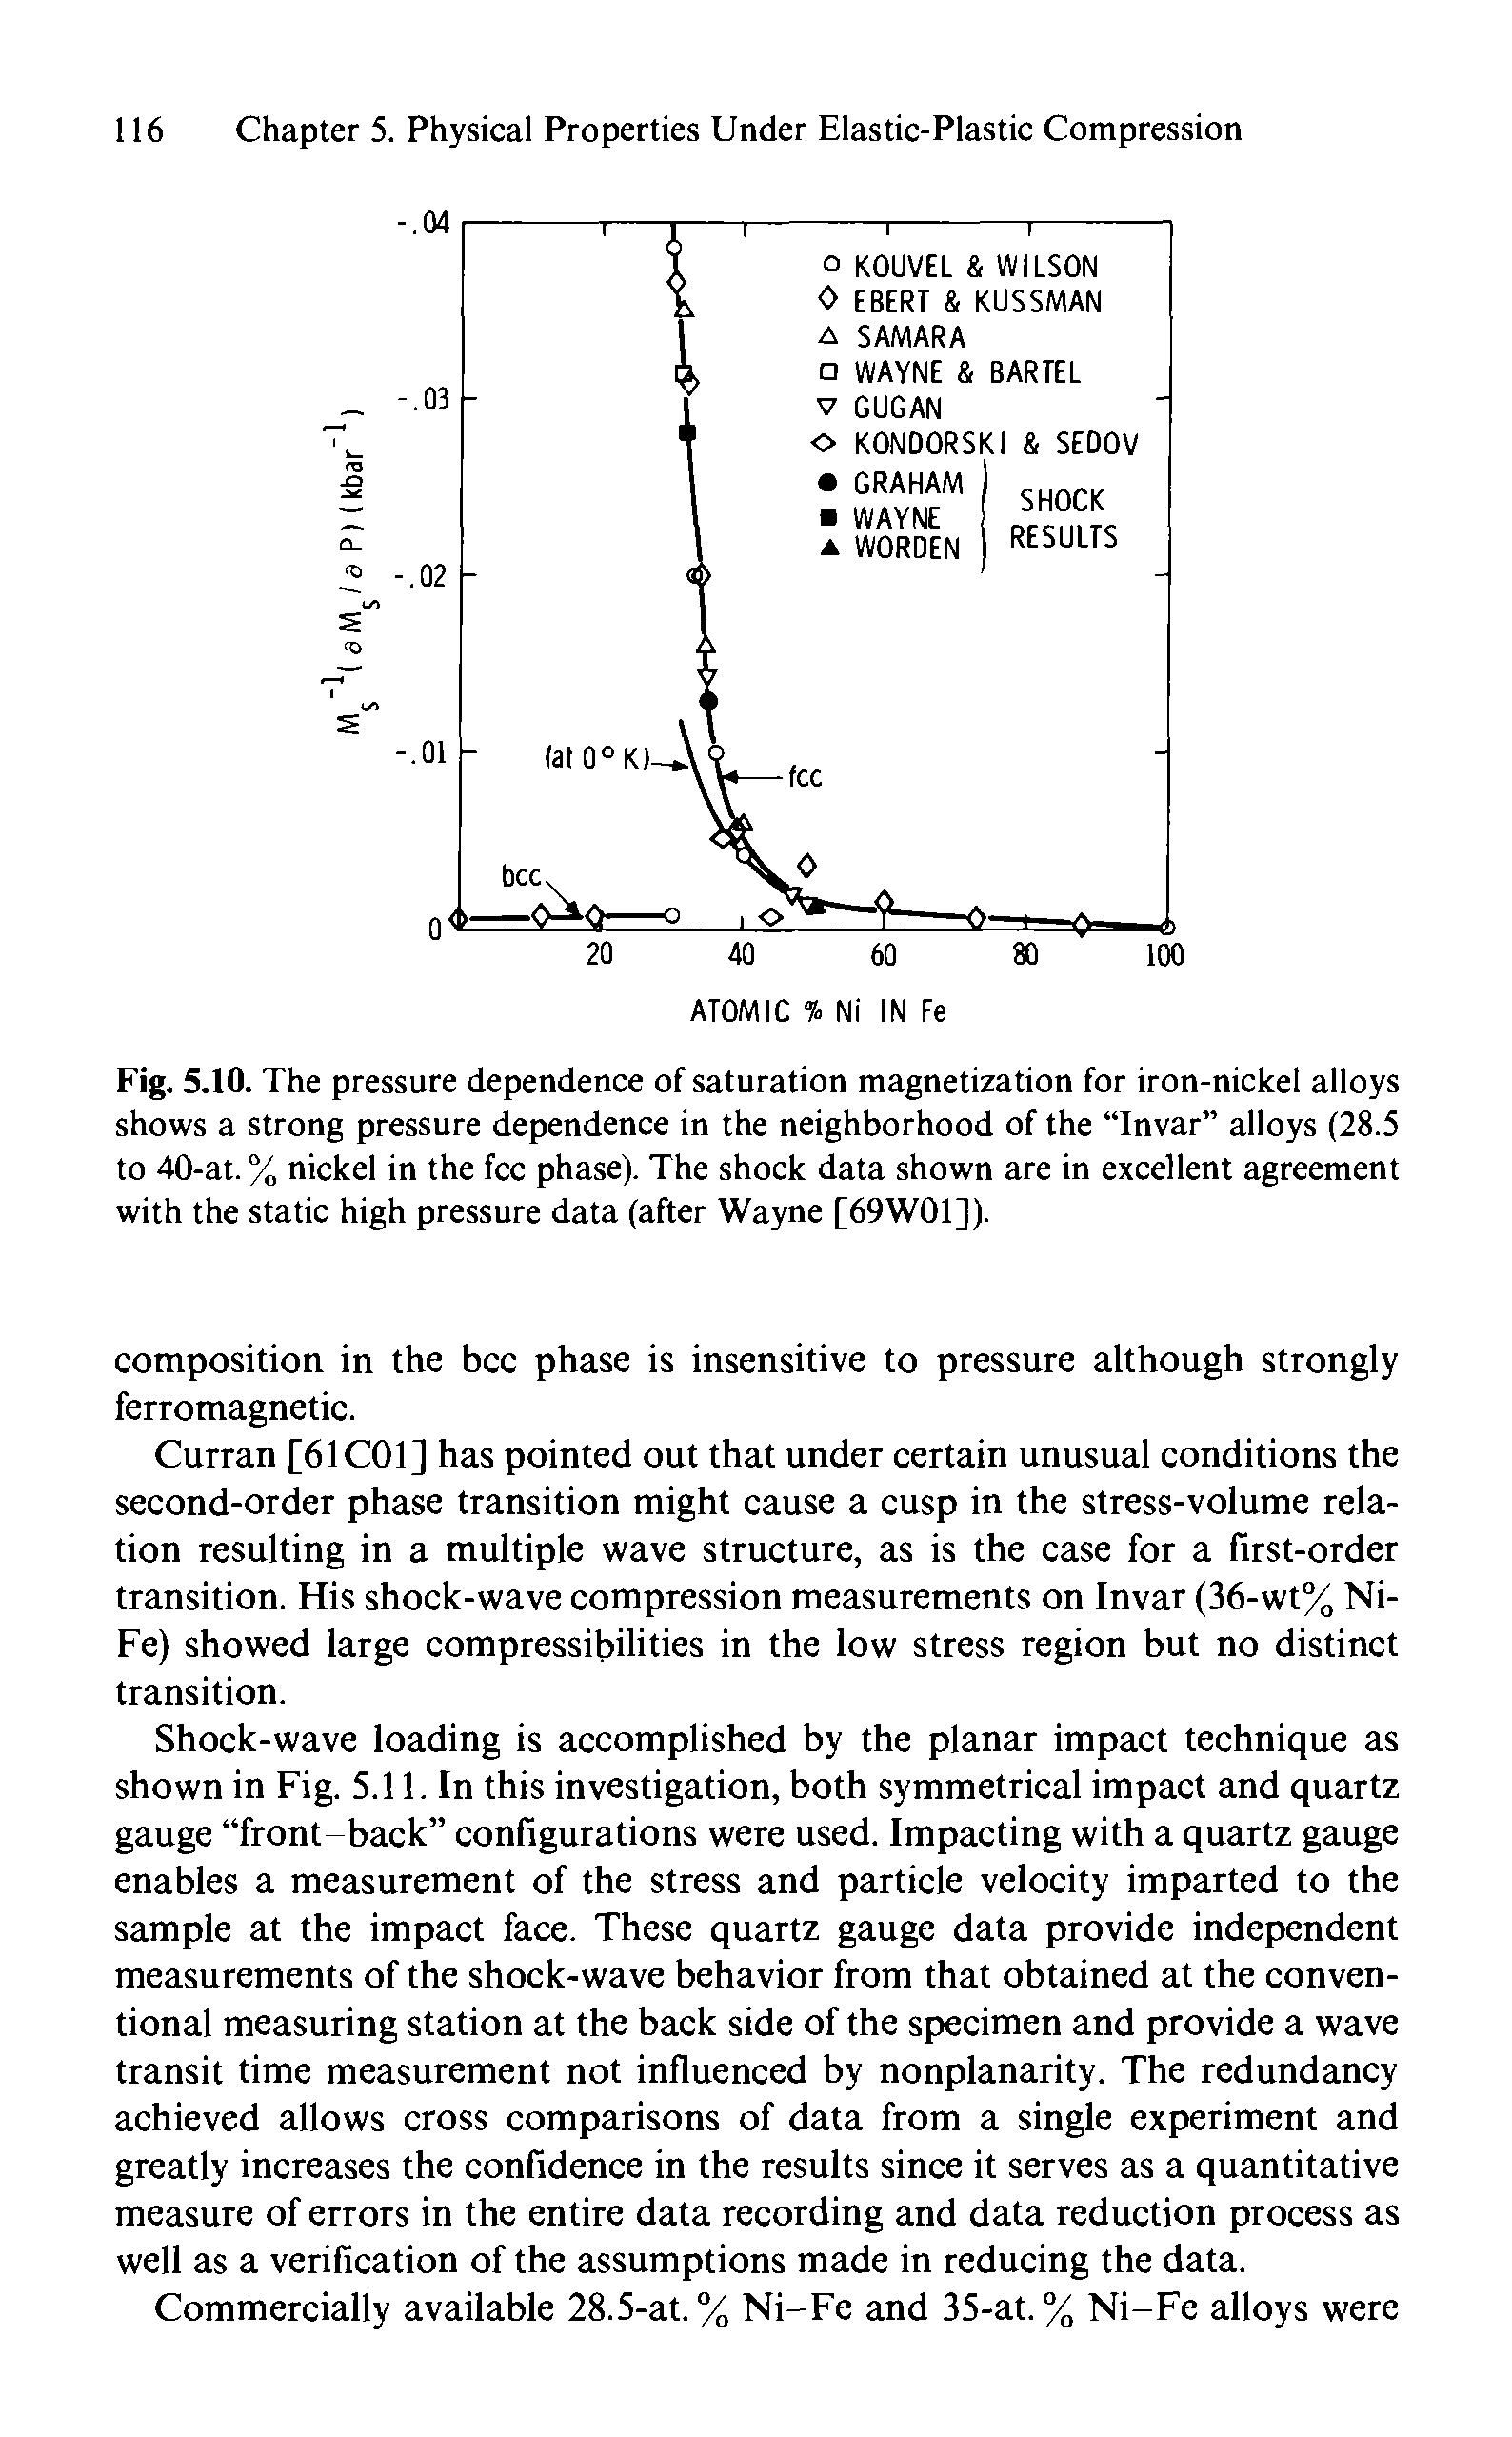 Fig. 5.10. The pressure dependence of saturation magnetization for iron-nickel alloys shows a strong pressure dependence in the neighborhood of the Invar alloys (28.5 to 40-at. % nickel in the fee phase). The shock data shown are in excellent agreement with the static high pressure data (after Wayne [69W01]).